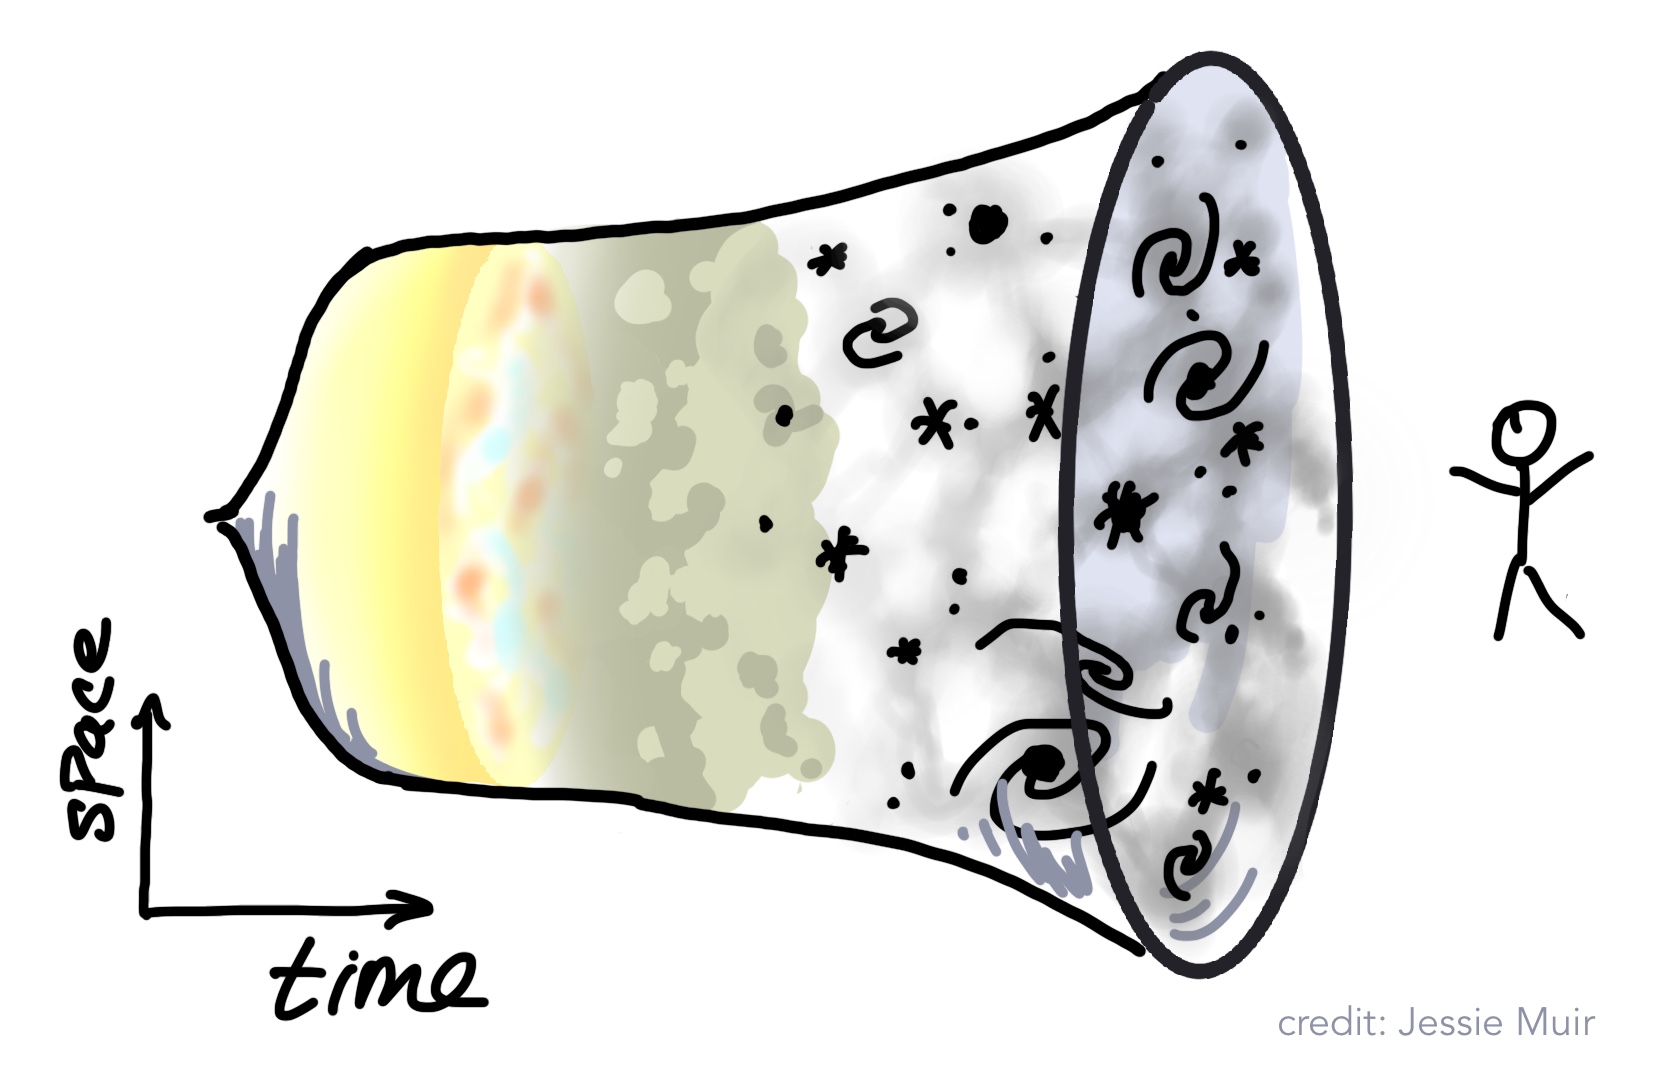 alt="Cartoon version of schematic history of the universe, shown as a tube with the horizontal axis going from right to left representing time, and the size of the tube in the vertical direction representing the expansion of the universe. Drawn into the tube are representation of the CMB surface of lass scattering, reionization, dark matter large scale structure, and galaxies."